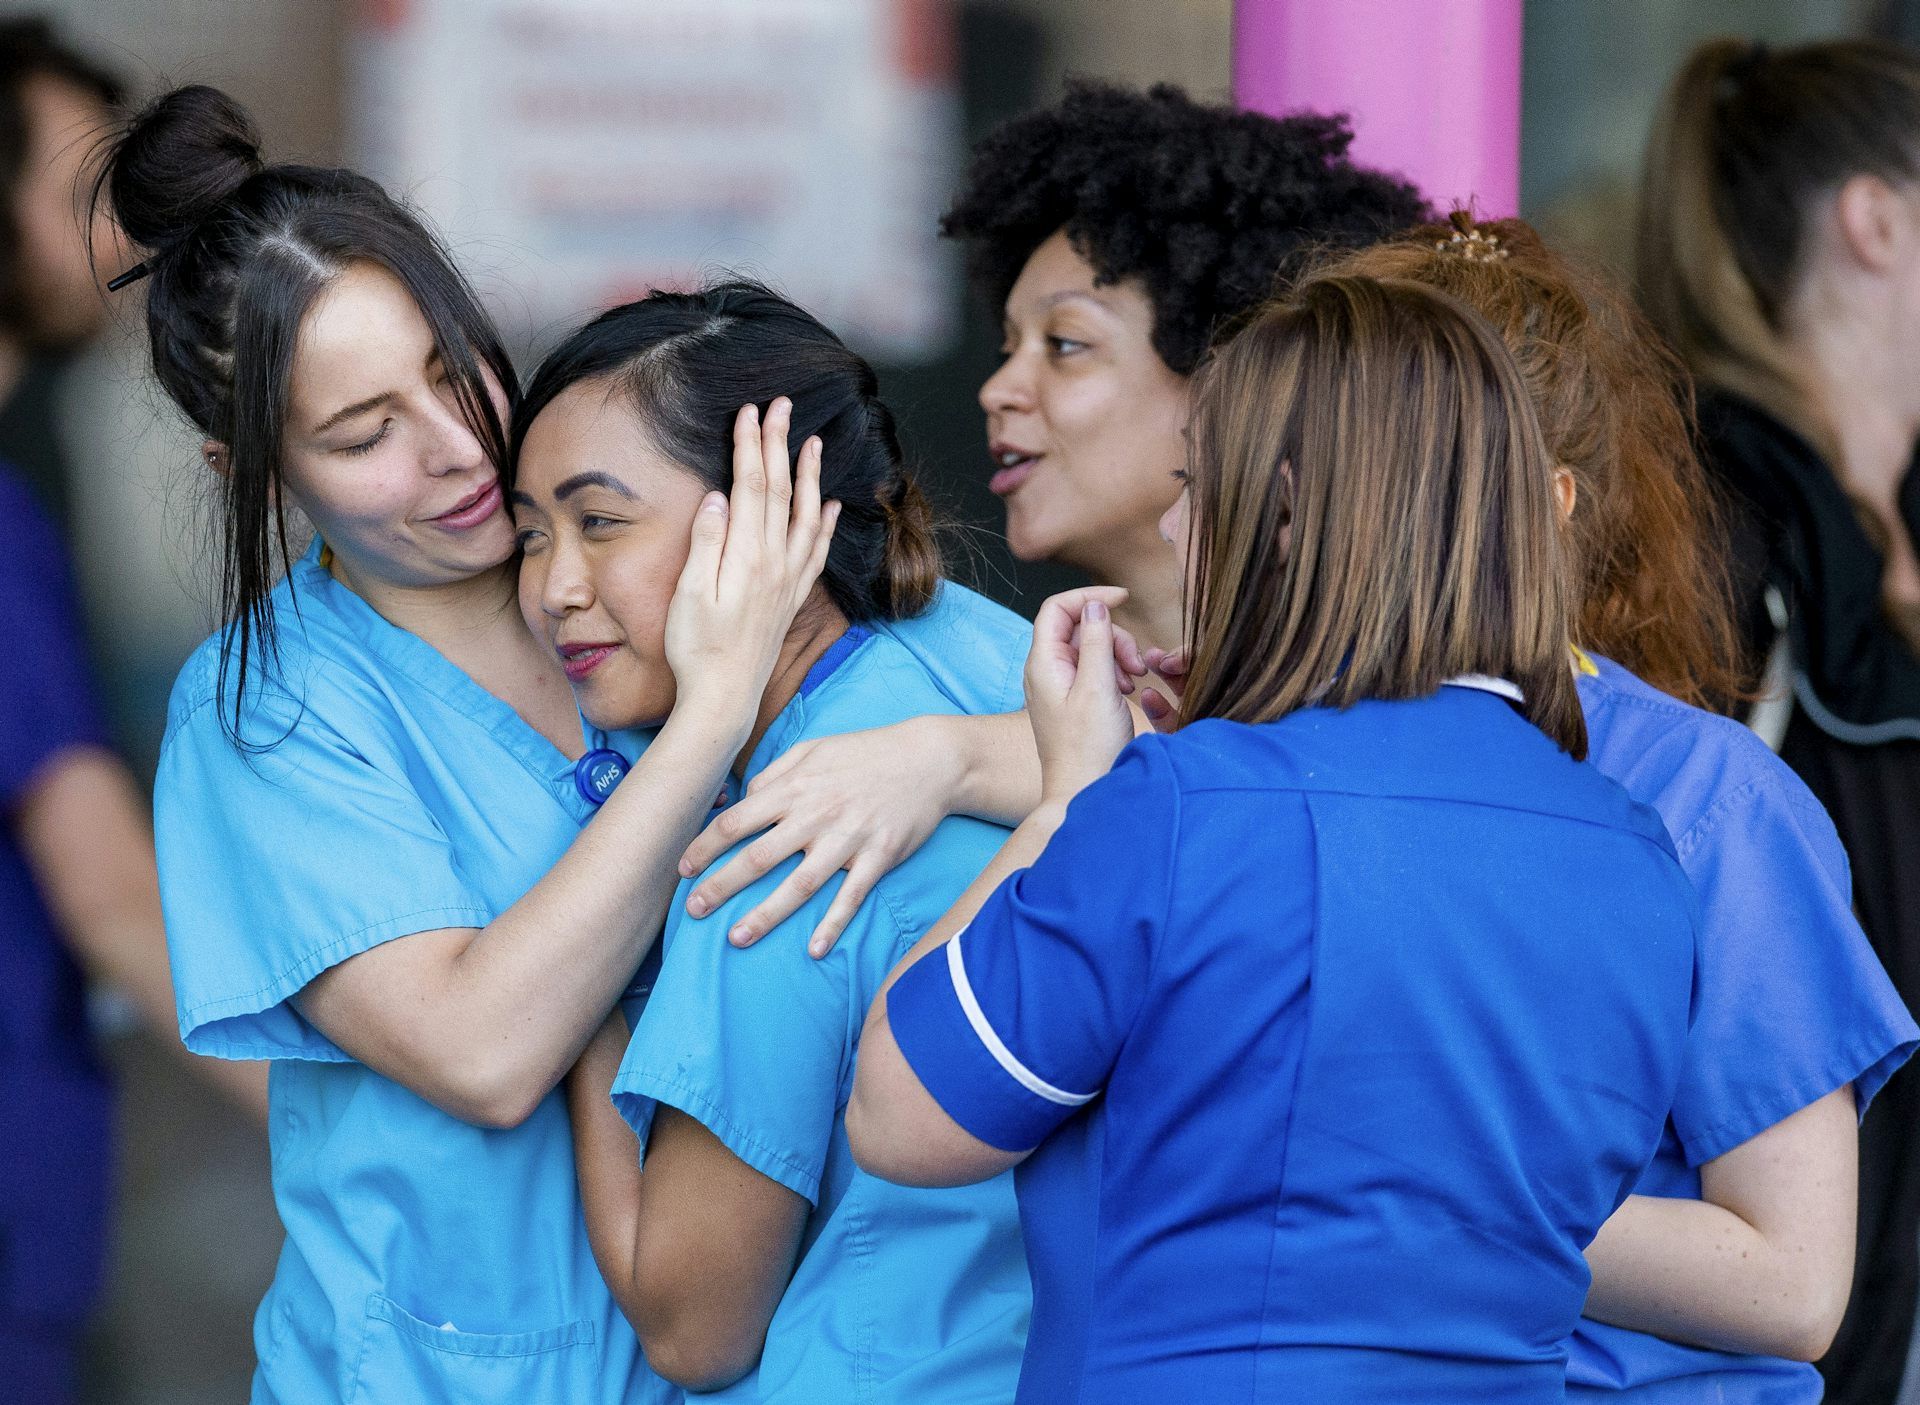 NHS nurses supporting each other